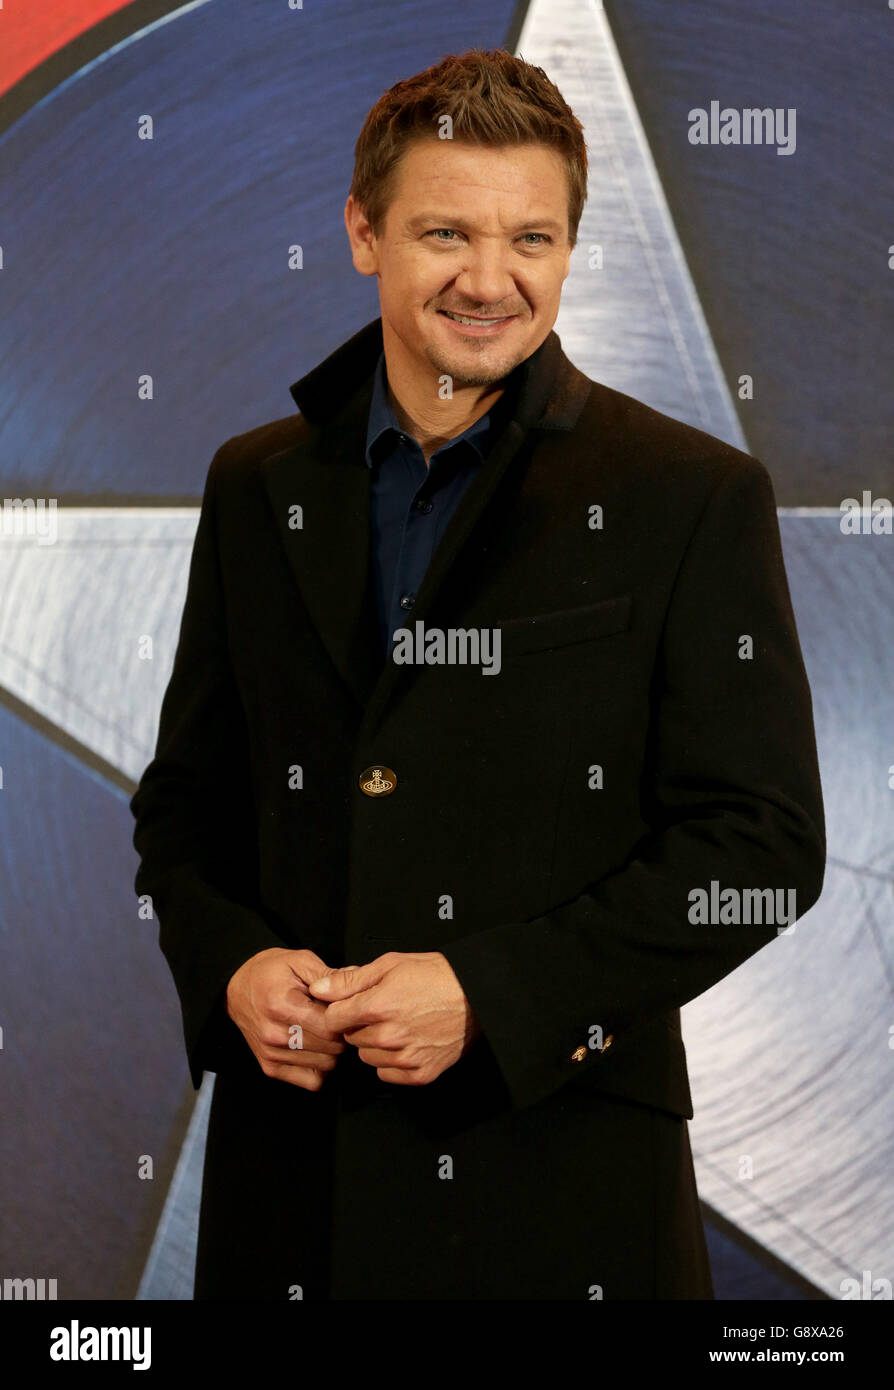 Jeremy Renner attending the Captain America Civil War Photocall, at the Corinthia Hotel, London. PRESS ASSOCIATION Photo. Picture date: Monday April 25, 2016. Photo credit should read: Daniel Leal-Olivas/PA Wire Stock Photo